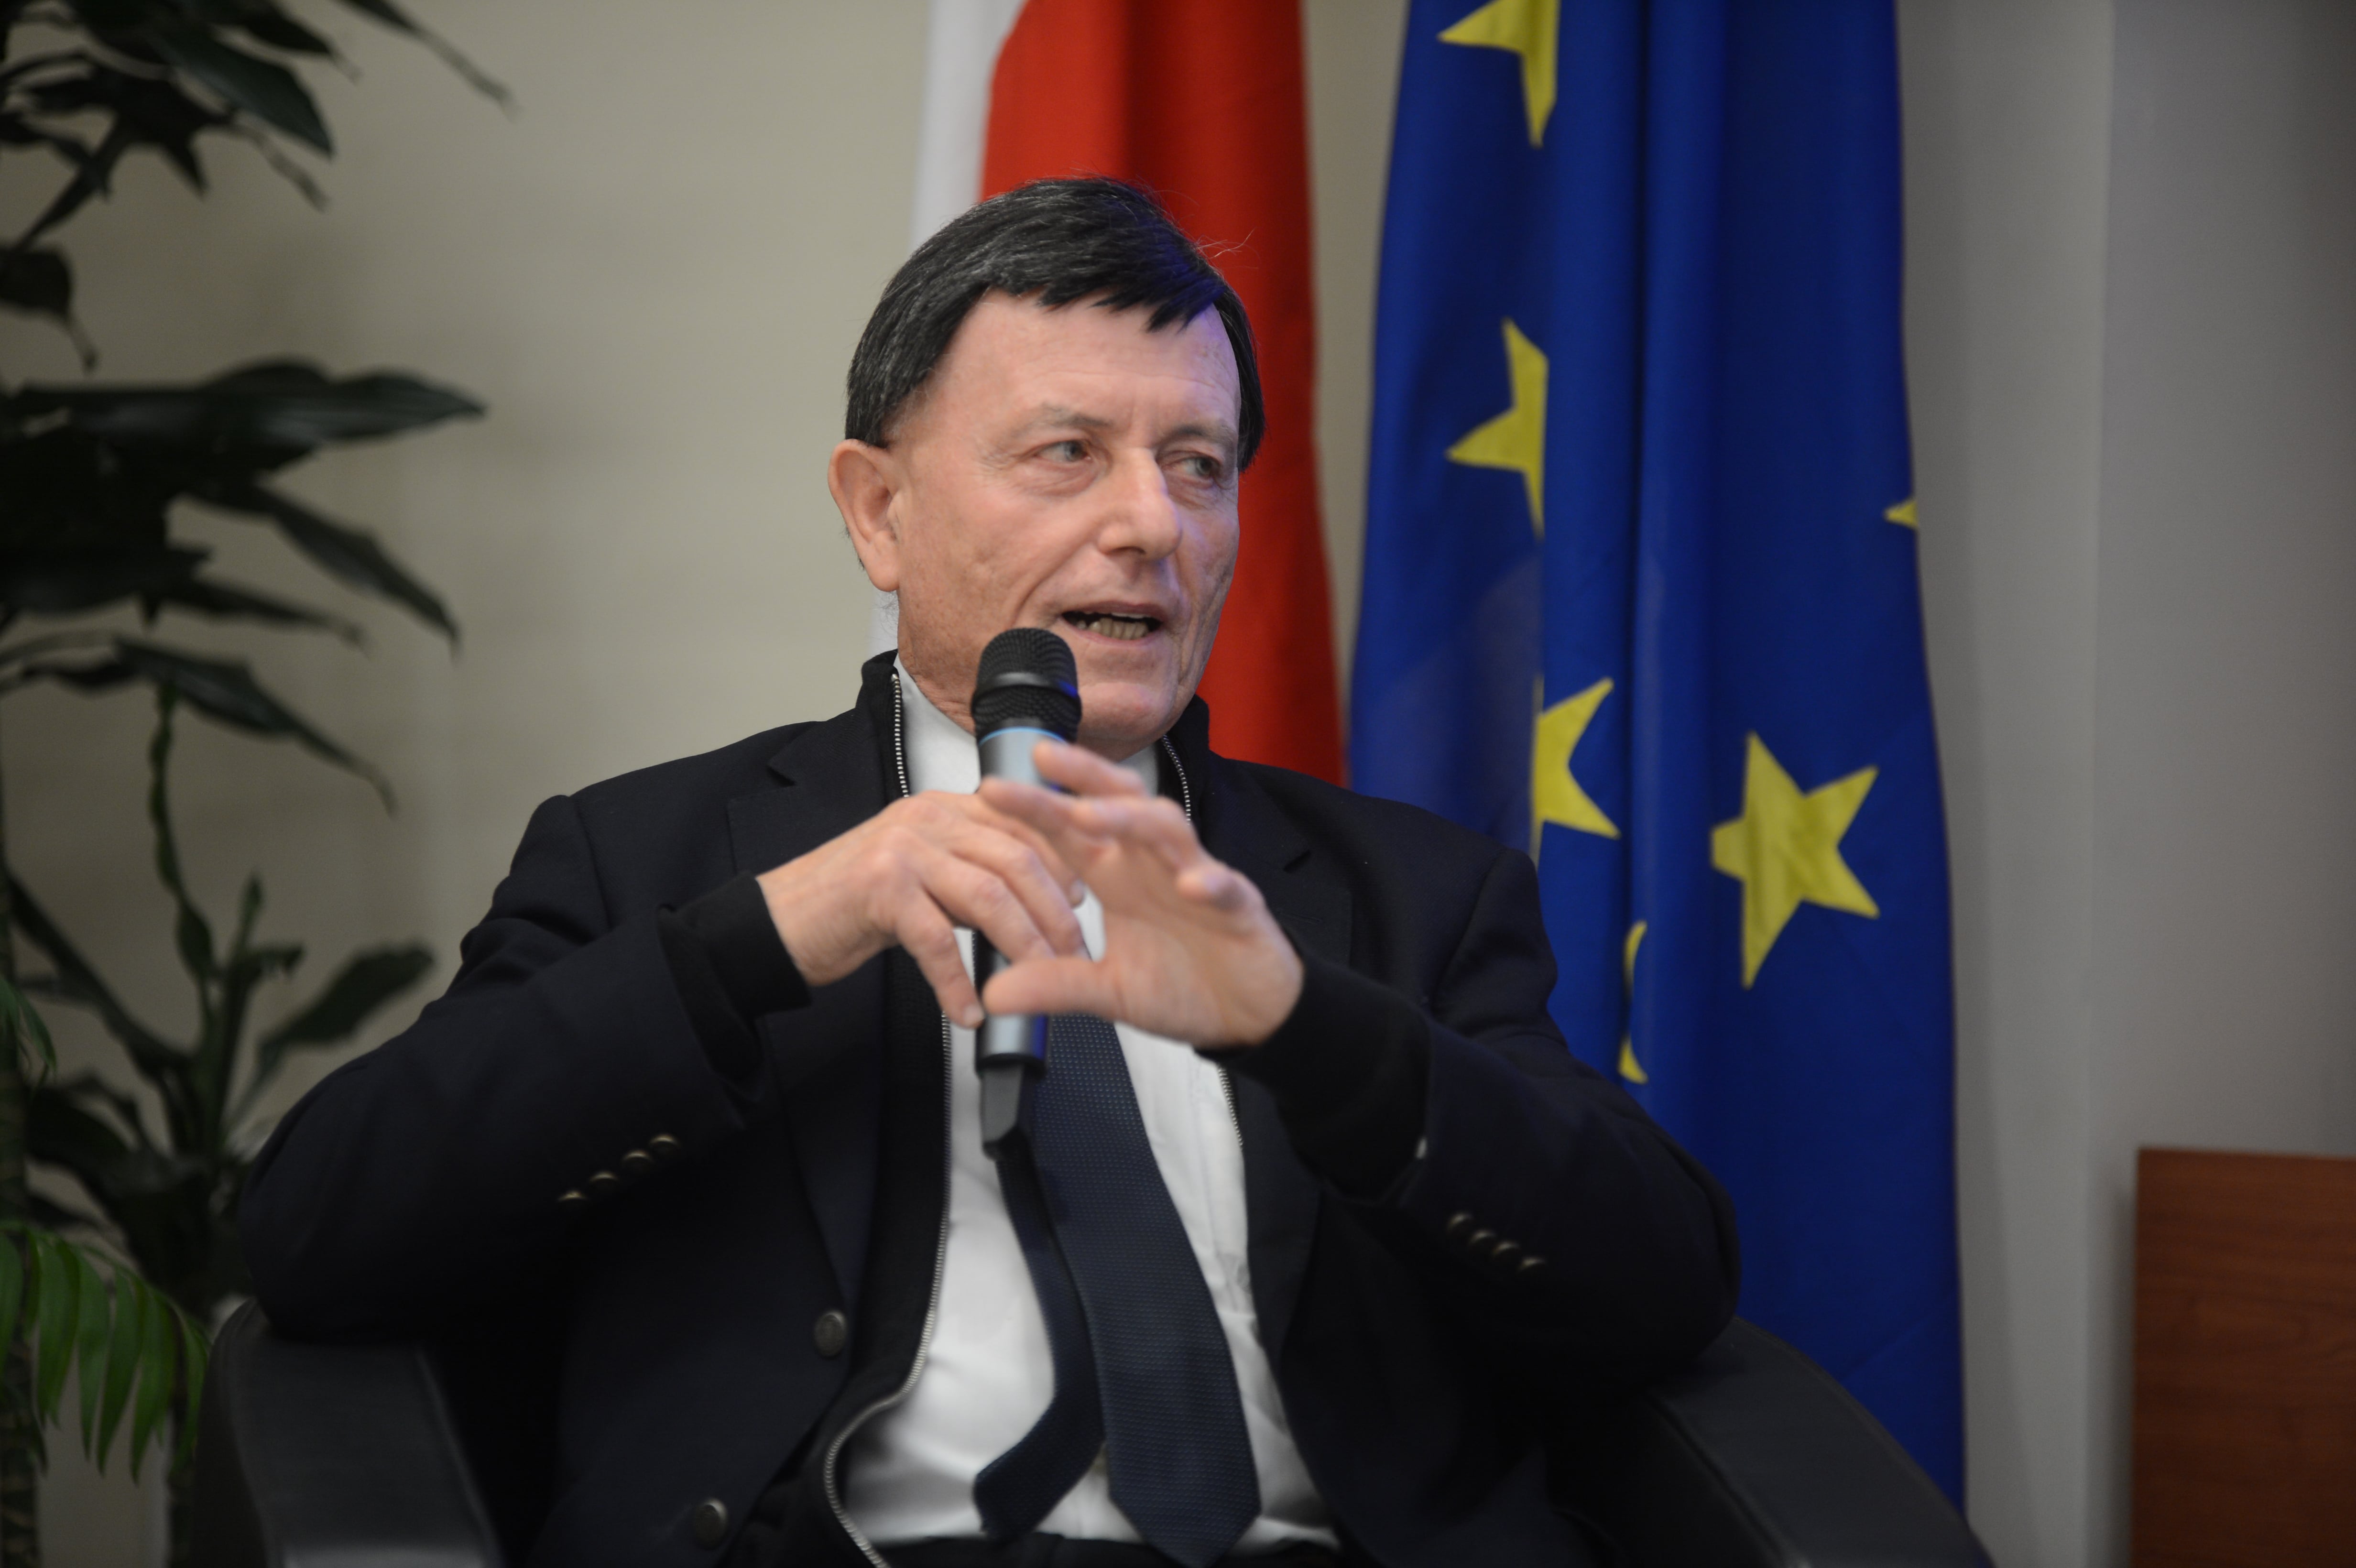 Alfred Sant speaking at "The Continental European Market" event